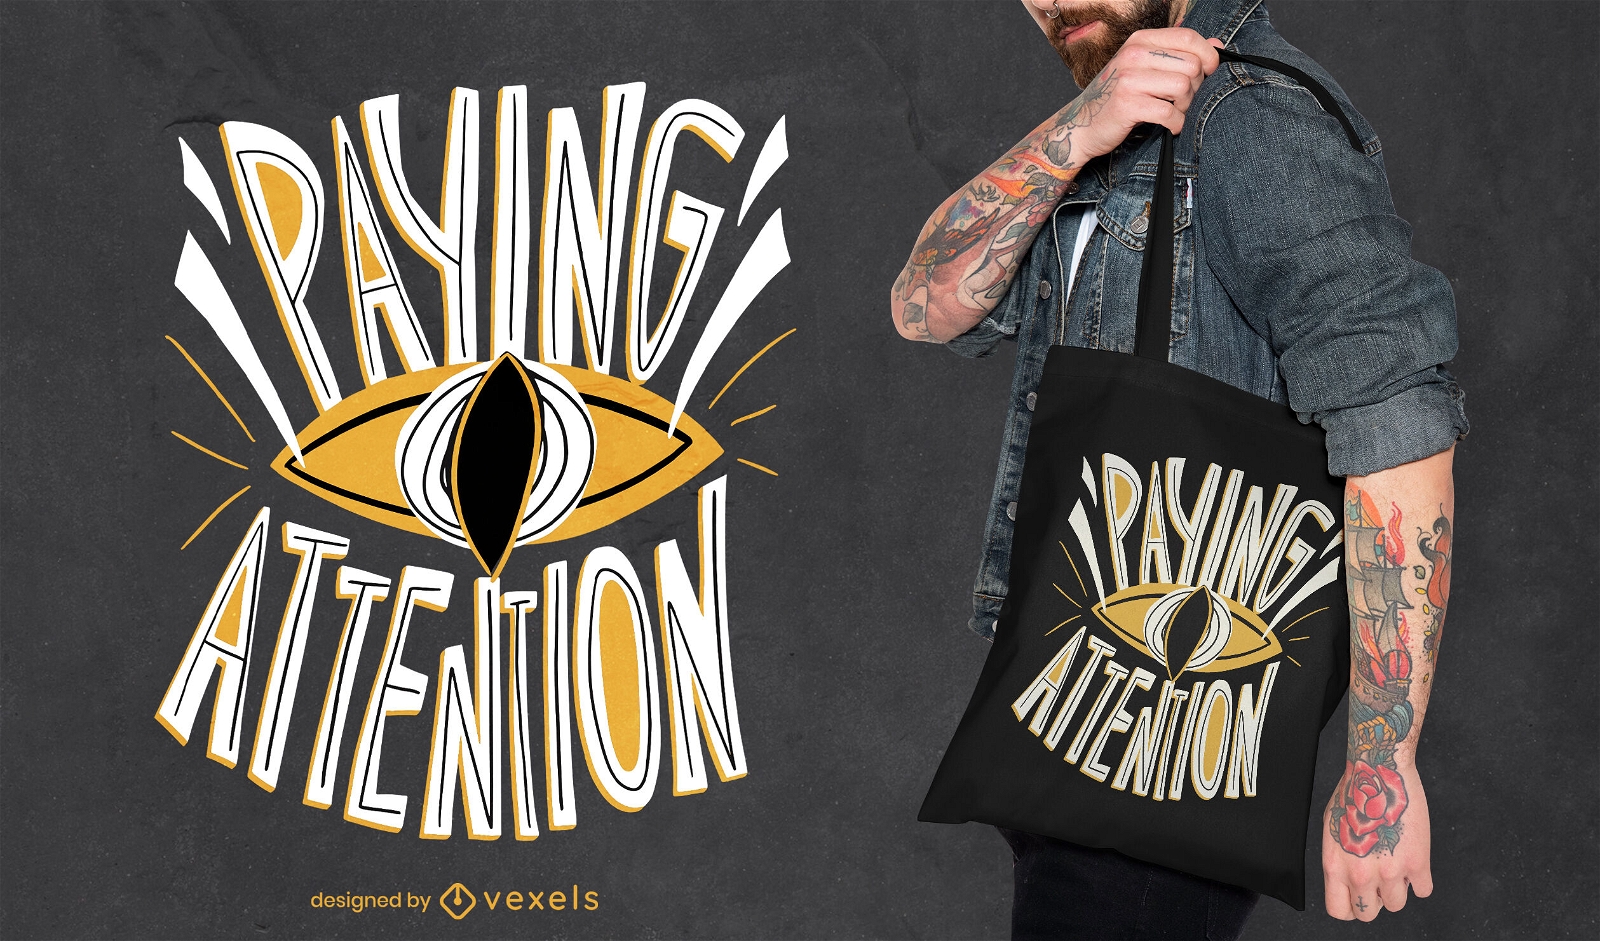 Eye attention quote tote bag design